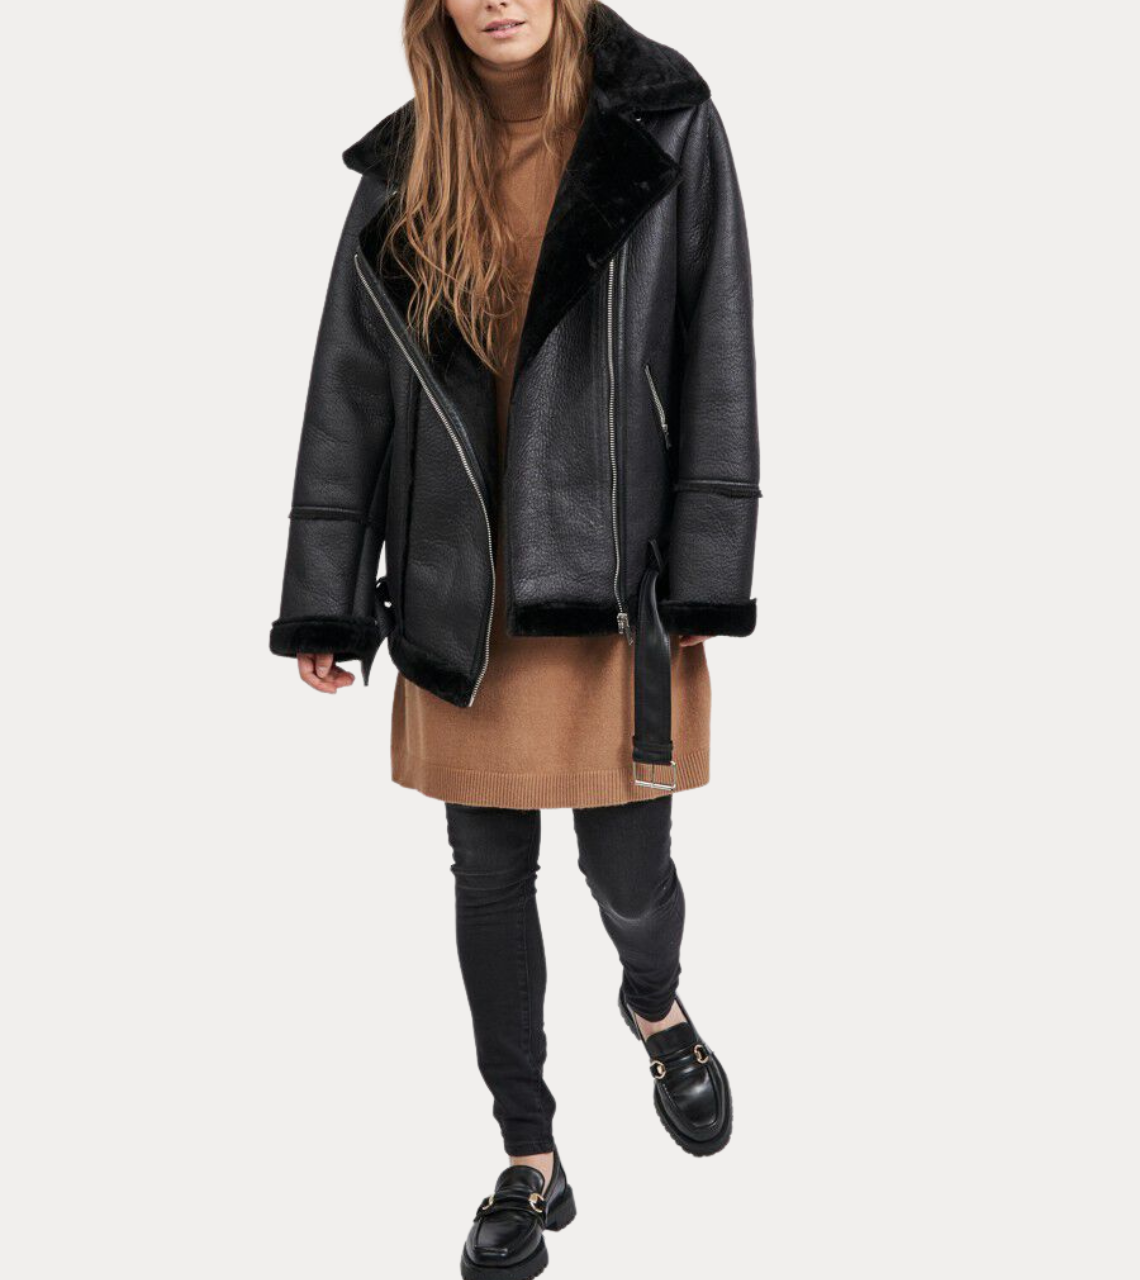  Shearling Leather Jacket